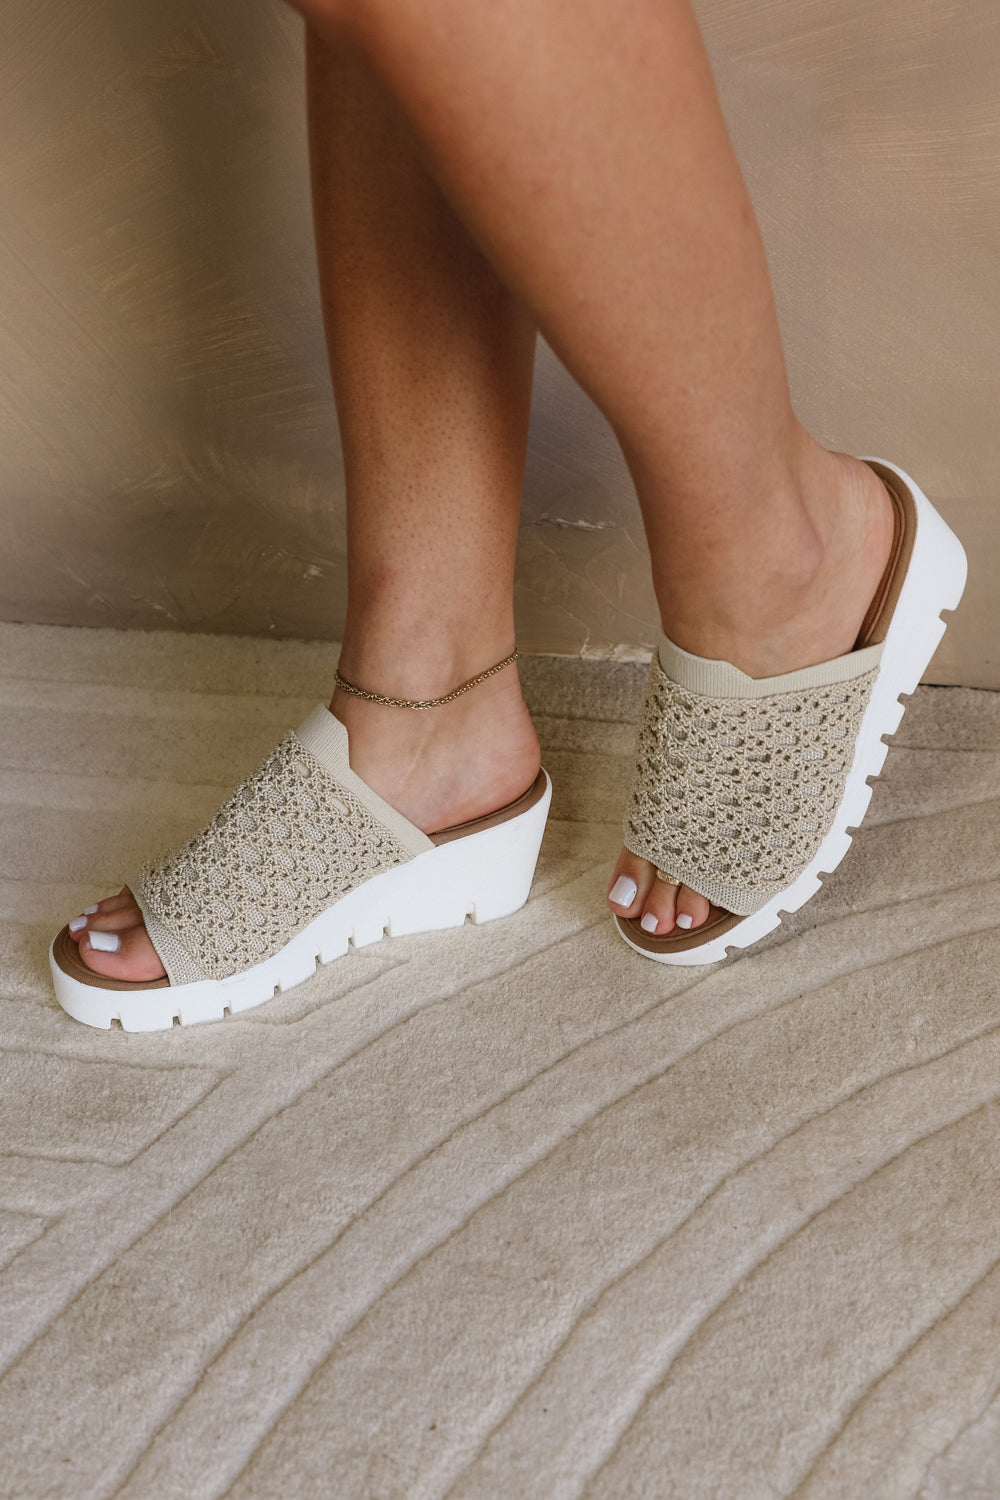 Side view of model wearing the Venti Crochet Sandal in Nude Silver which features Crochet Fabric Upper, Slide On Style, Memory Foam Footbed, 2.25 Inch Platform Wedge and Flexible Rubber Outsole